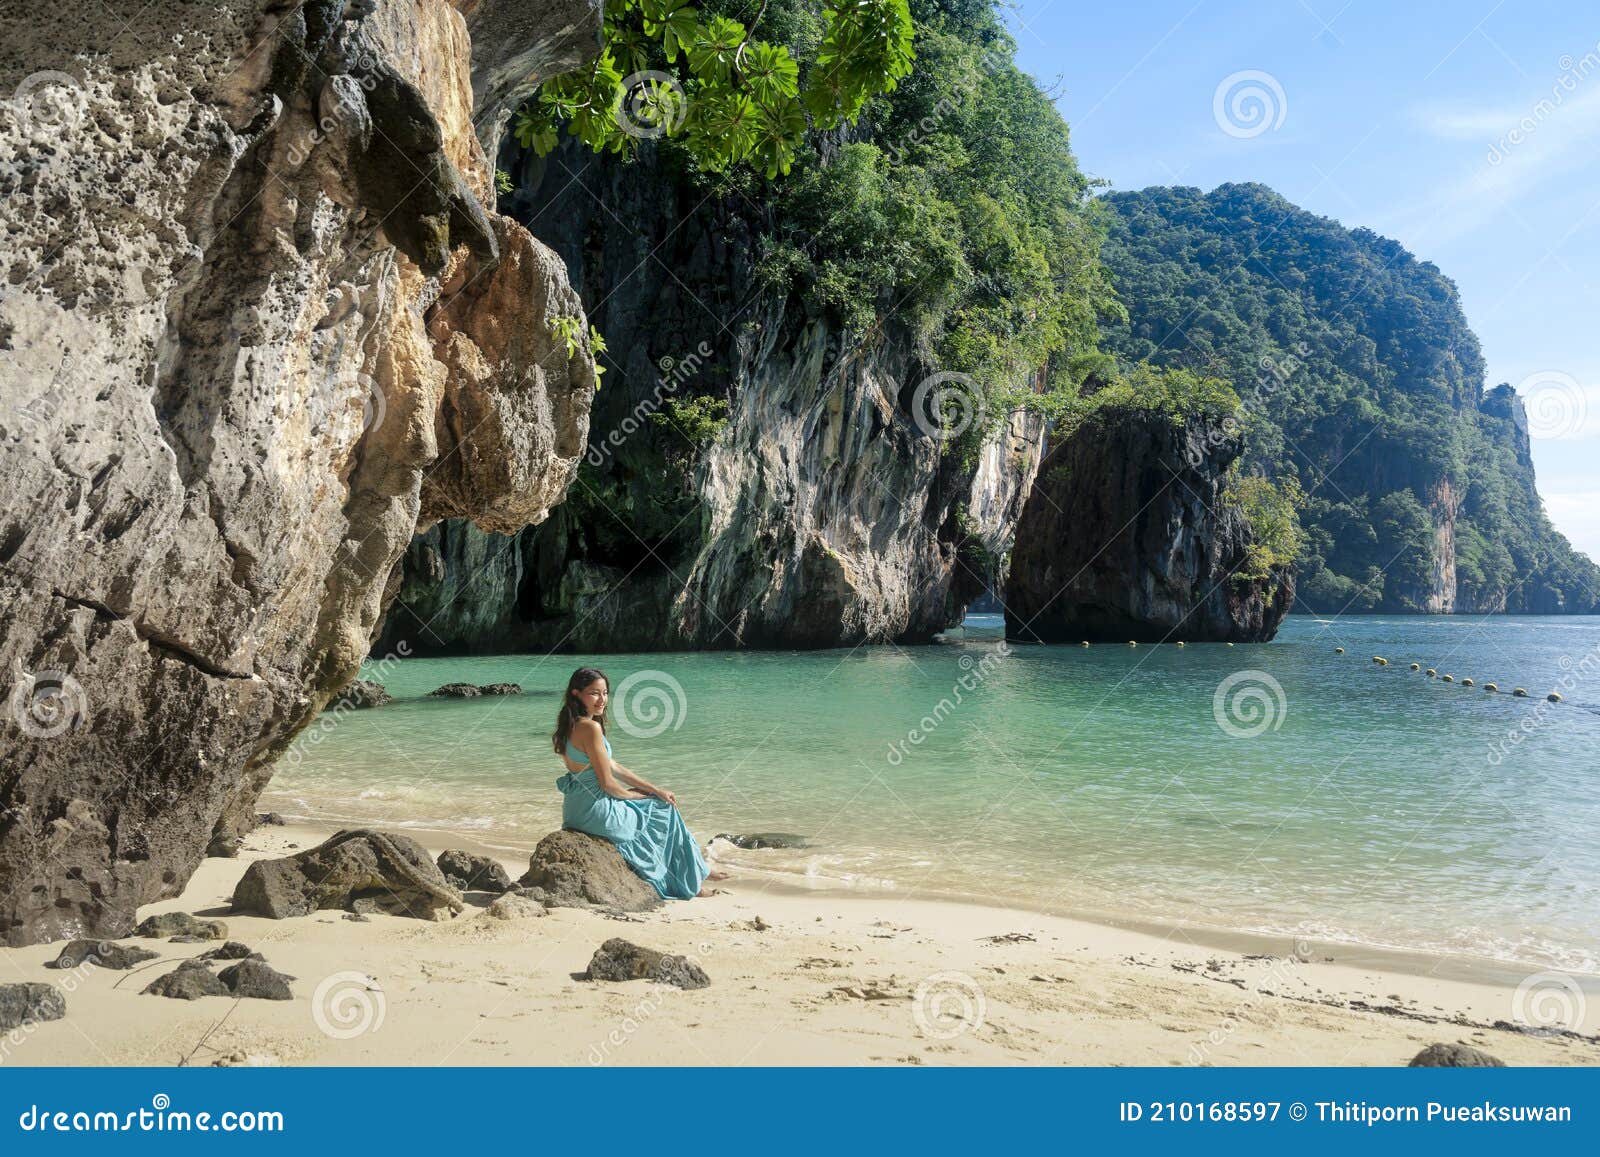 Woman Sit on Beach at Lao Lading Island Stock Image - Image of nature ...